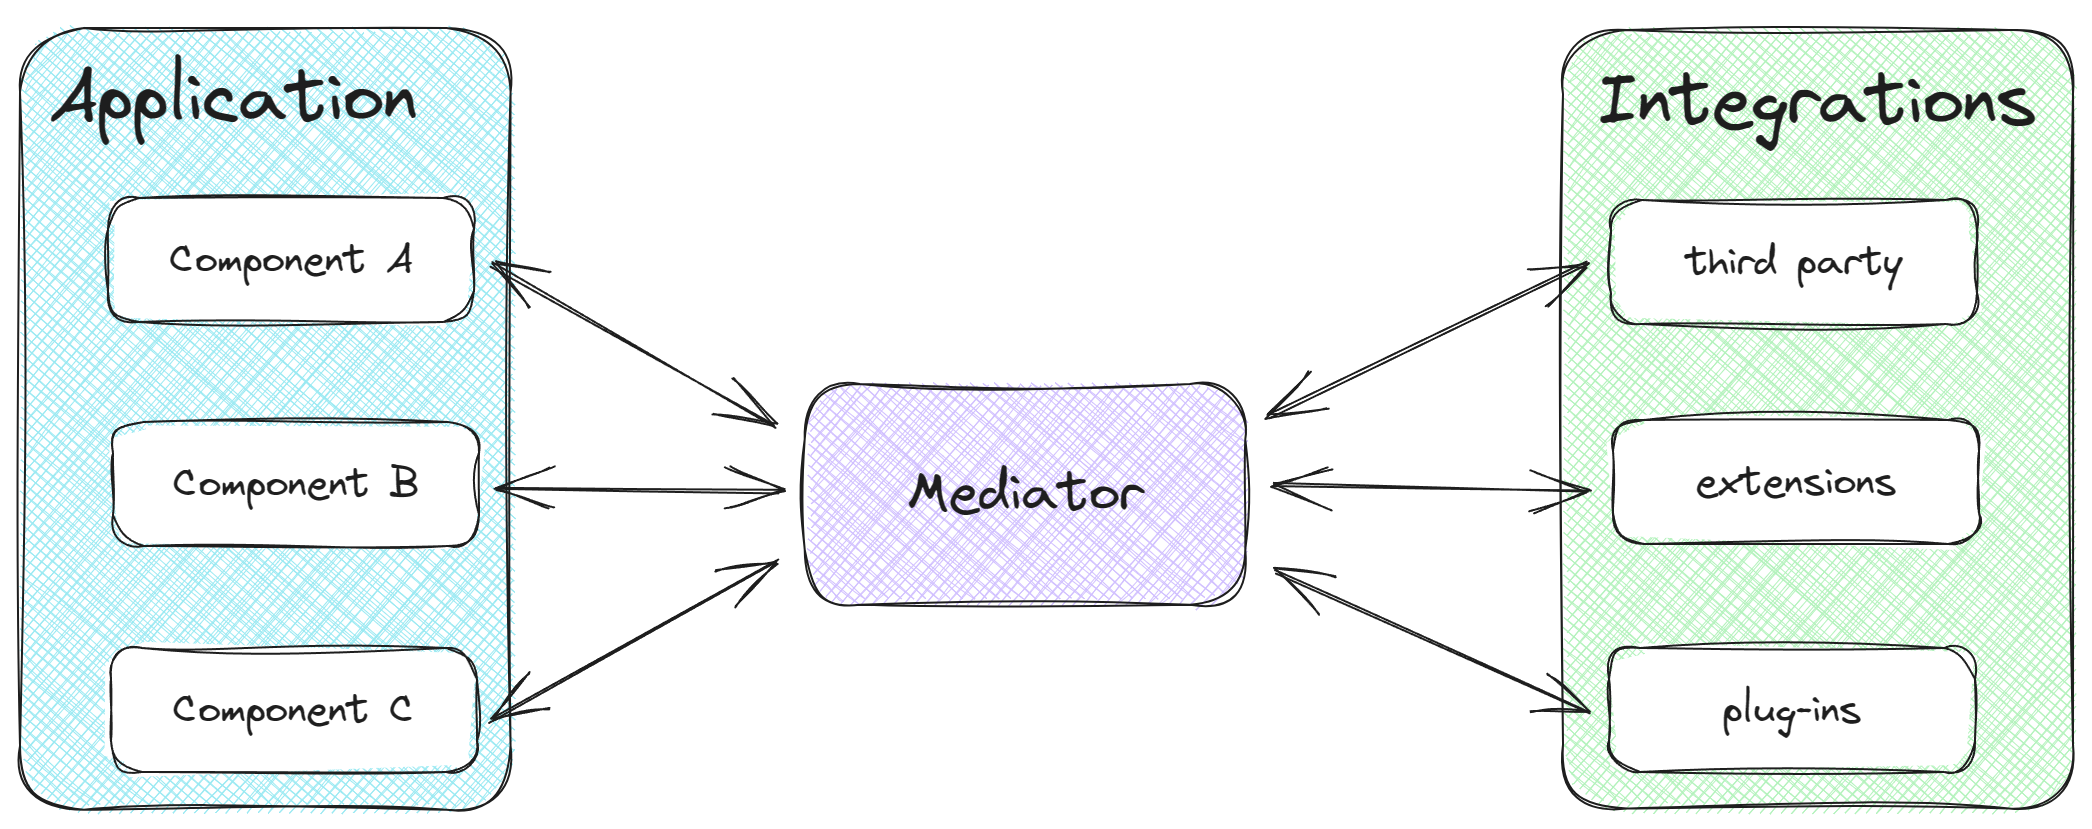 Mediator flow chart - made in excalidraw.com